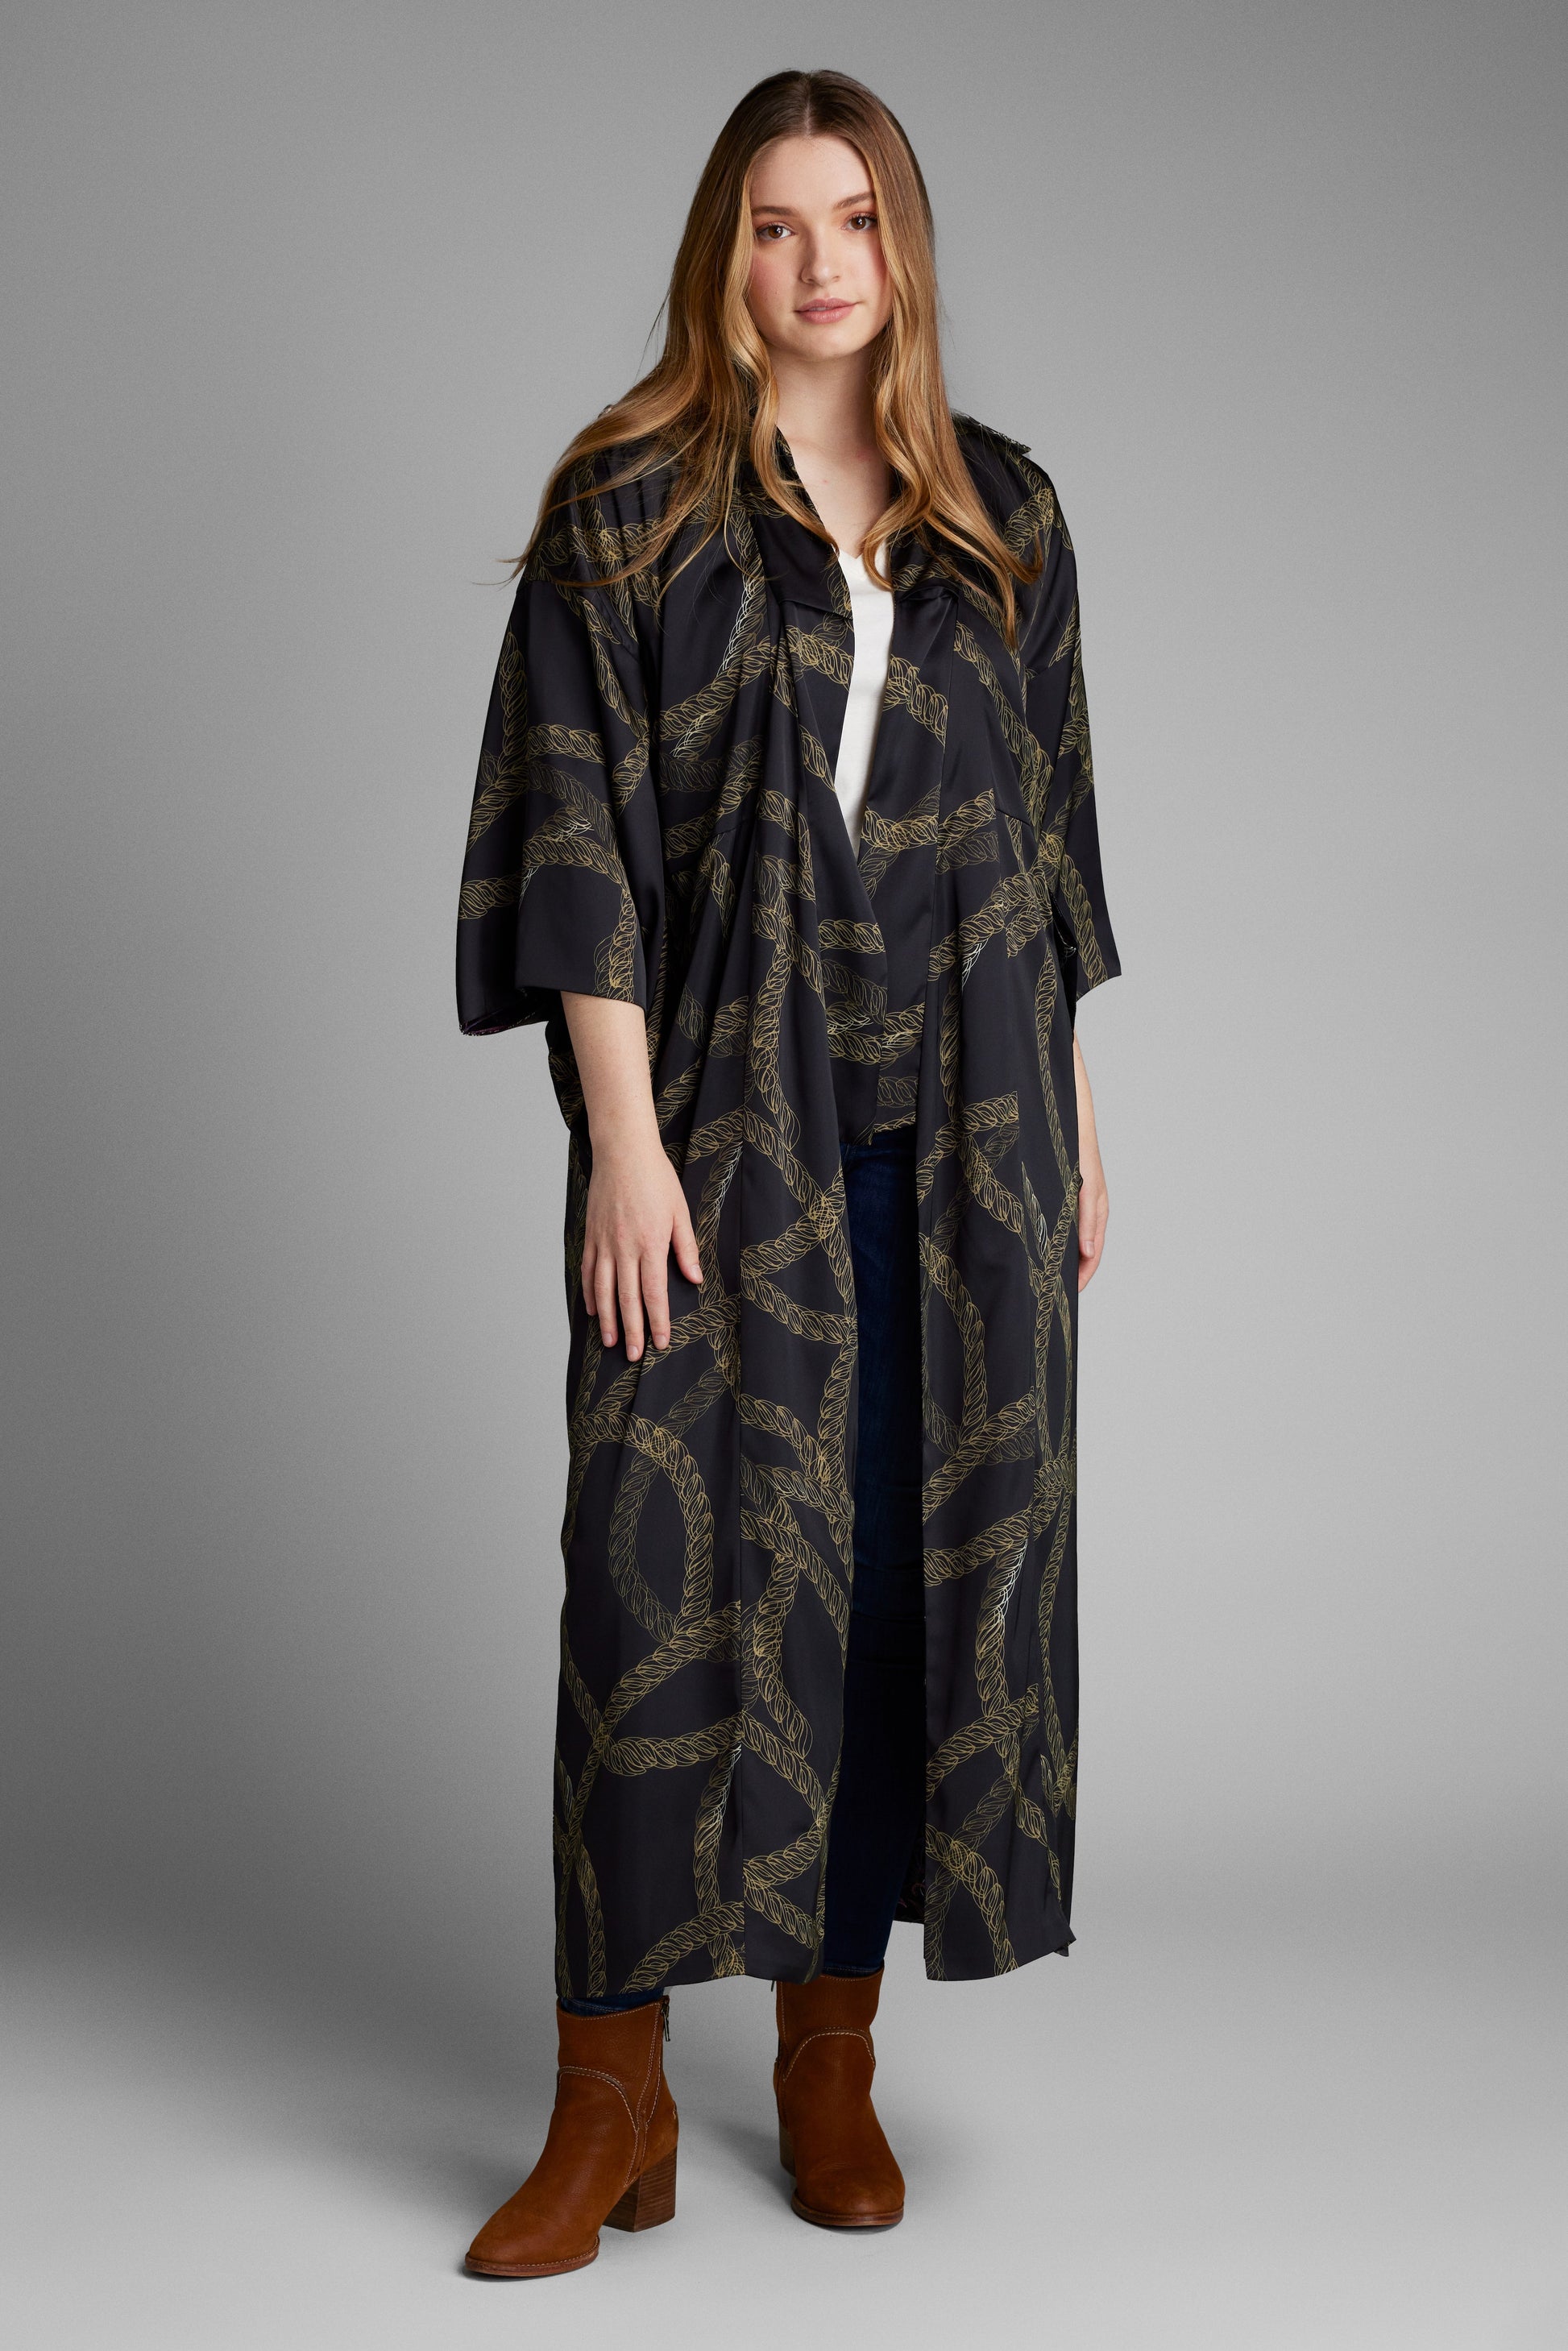 Side profile of woman wearing a black and gold chain print kimono duster made from recycled materials 3